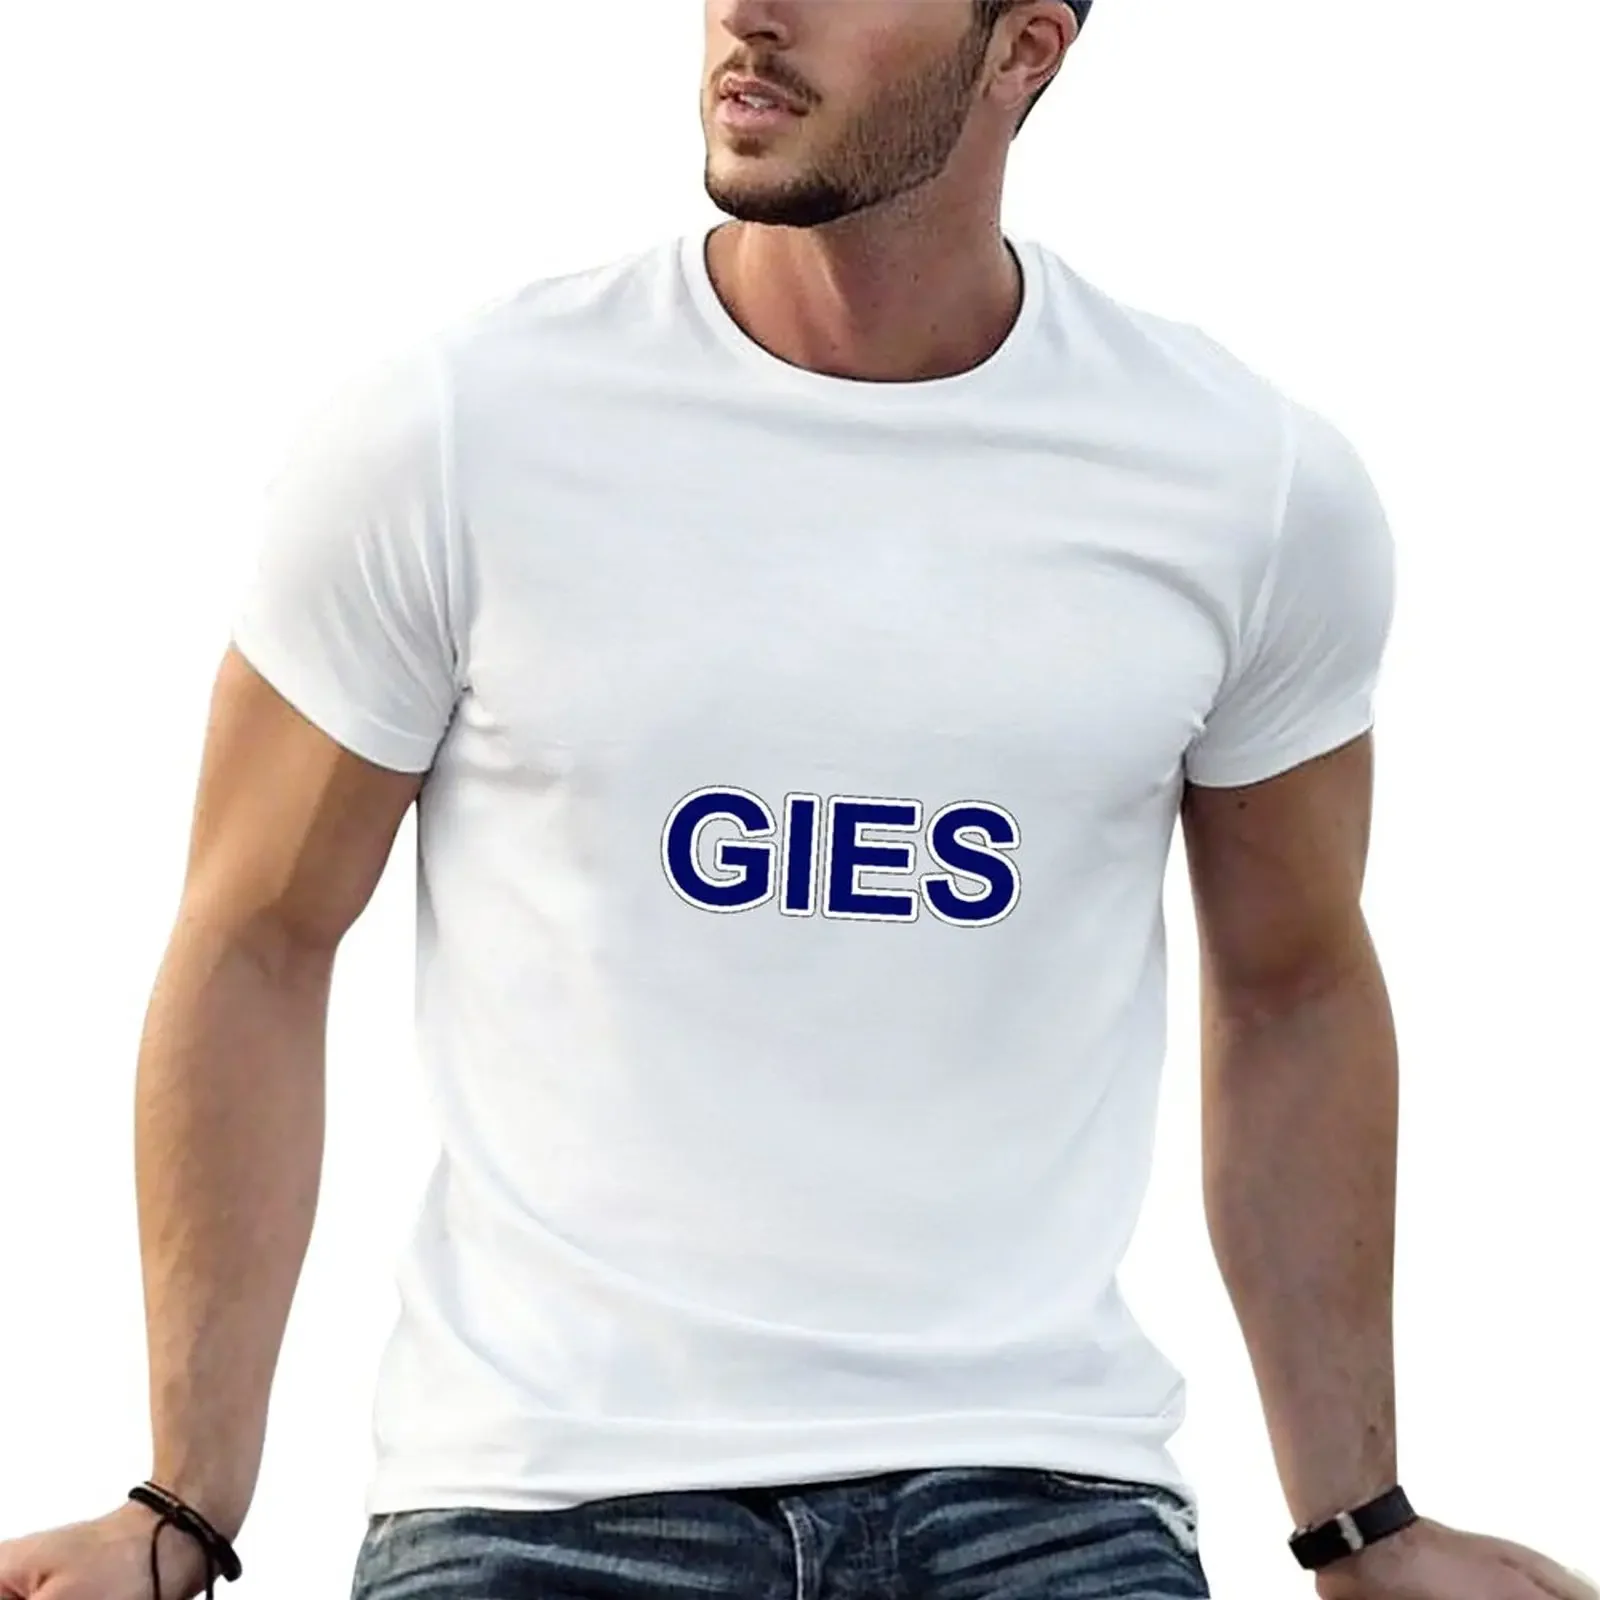 

University of Illinois Gies Business School T-Shirt cute tops kawaii clothes boys whites heavyweight t shirts for men